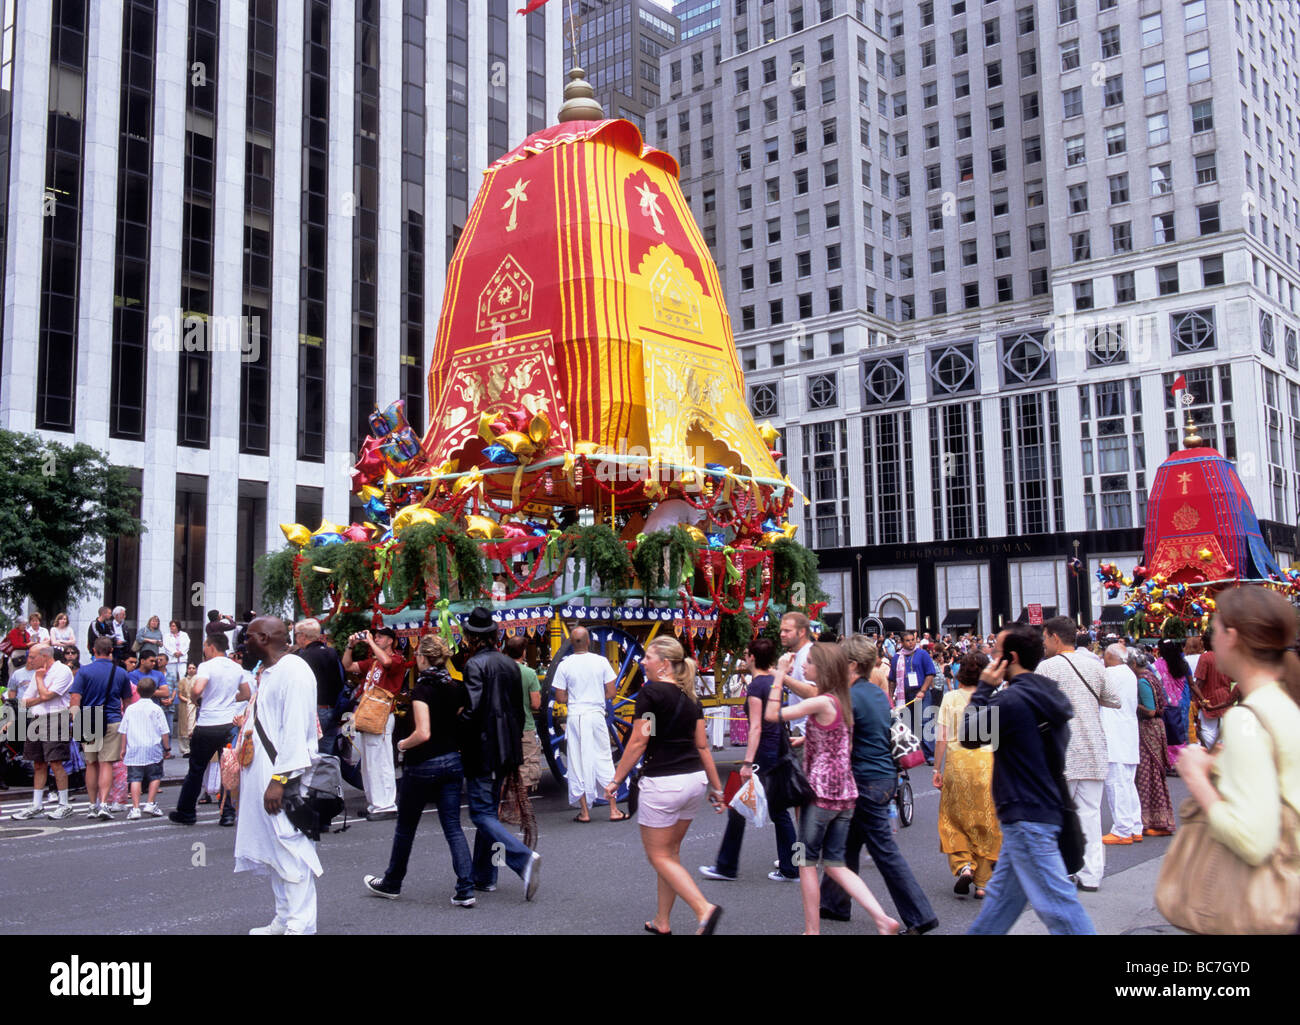 New York City Colorful Hare Krishna Hindu festival parade float on Fifth Avenue in Midtown Manhattan. Crowd watching the Hindu religious procession. Stock Photo